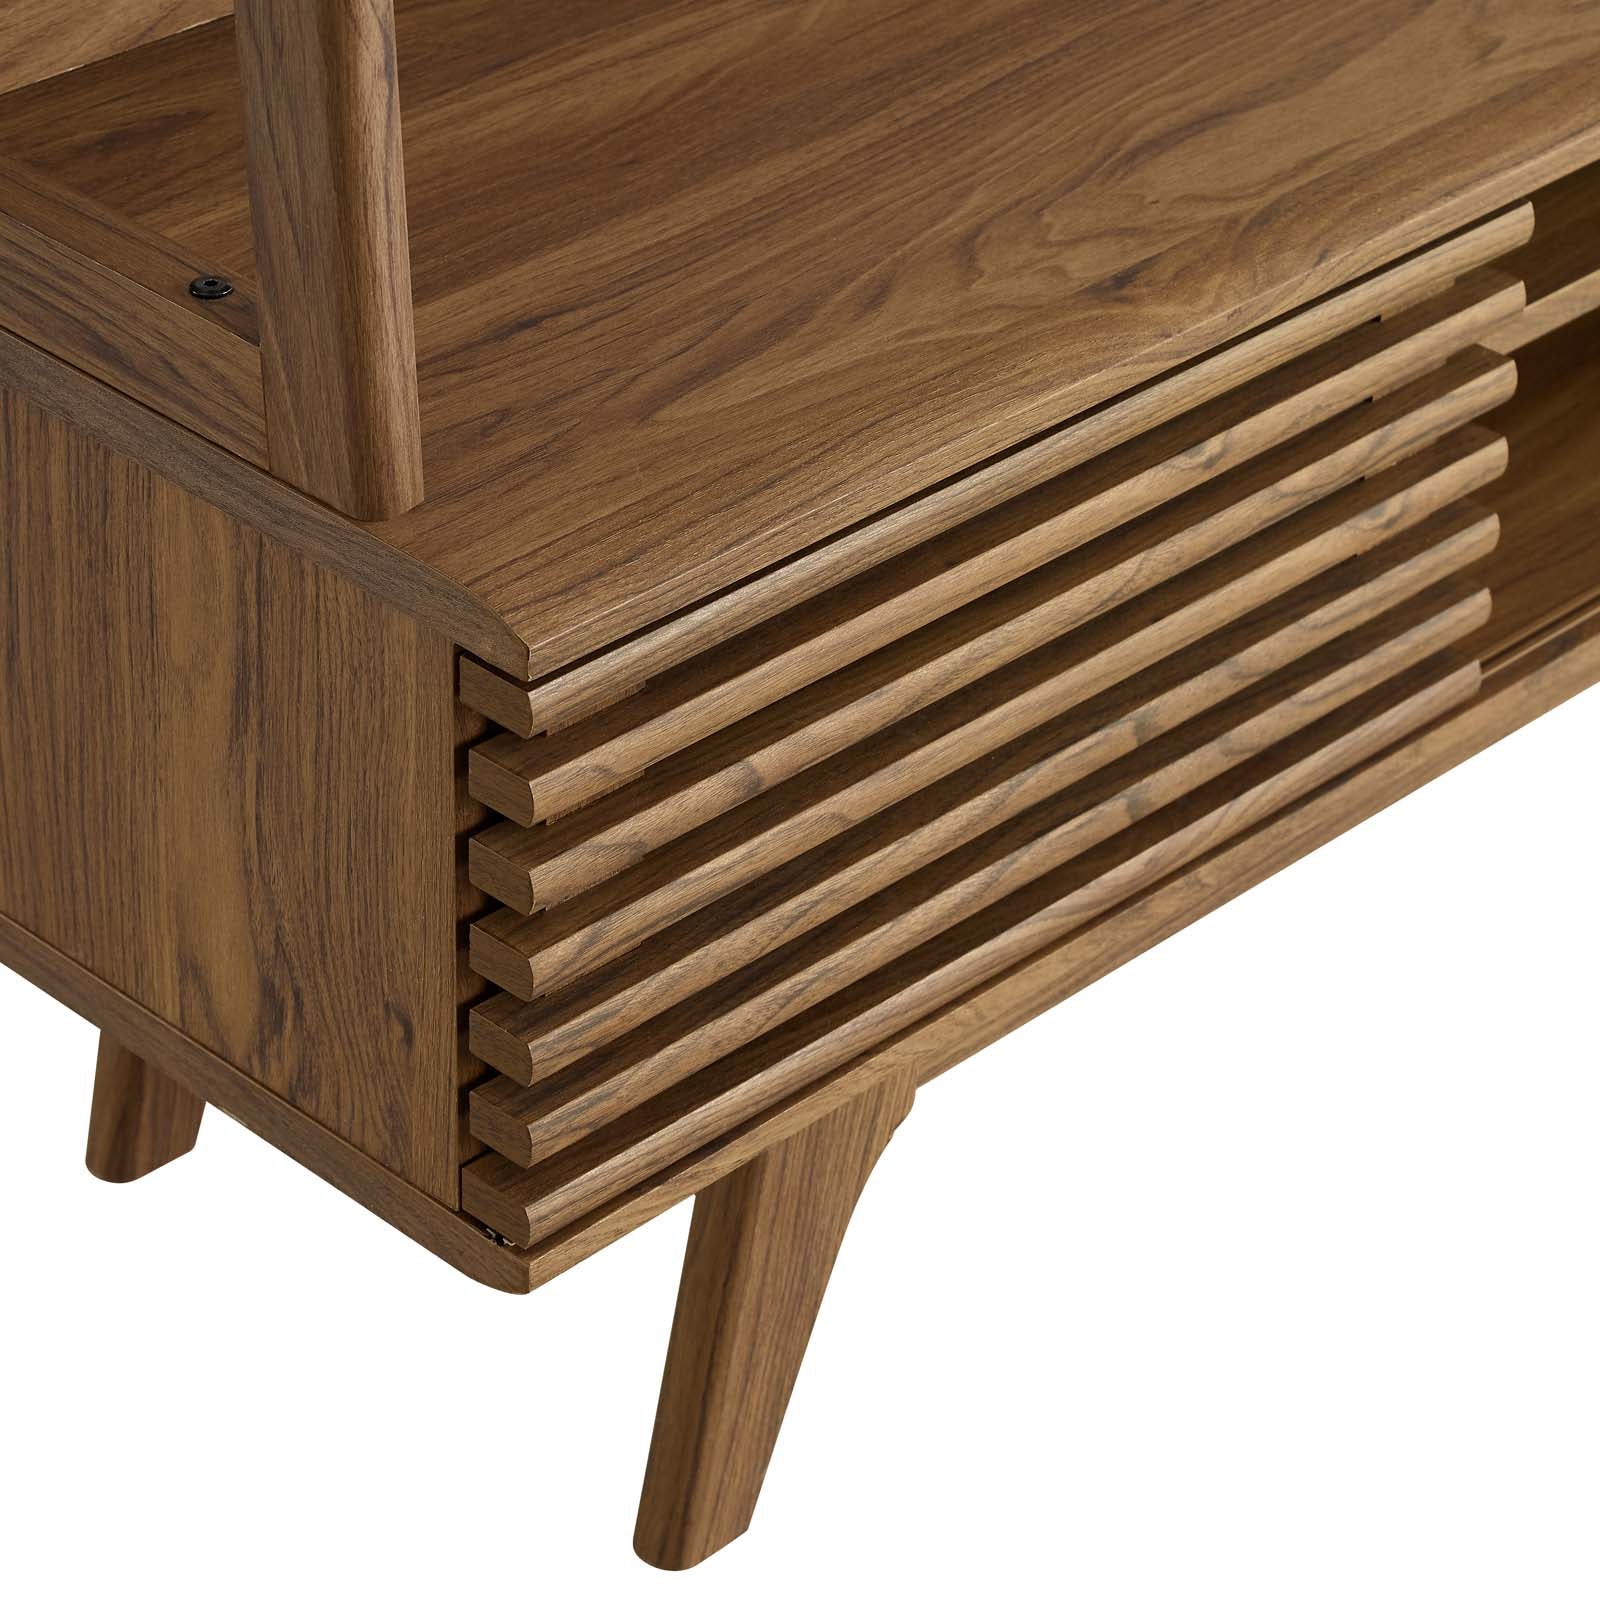 Render TV Stand Entertainment Center in Walnut - East Shore Modern Home Furnishings